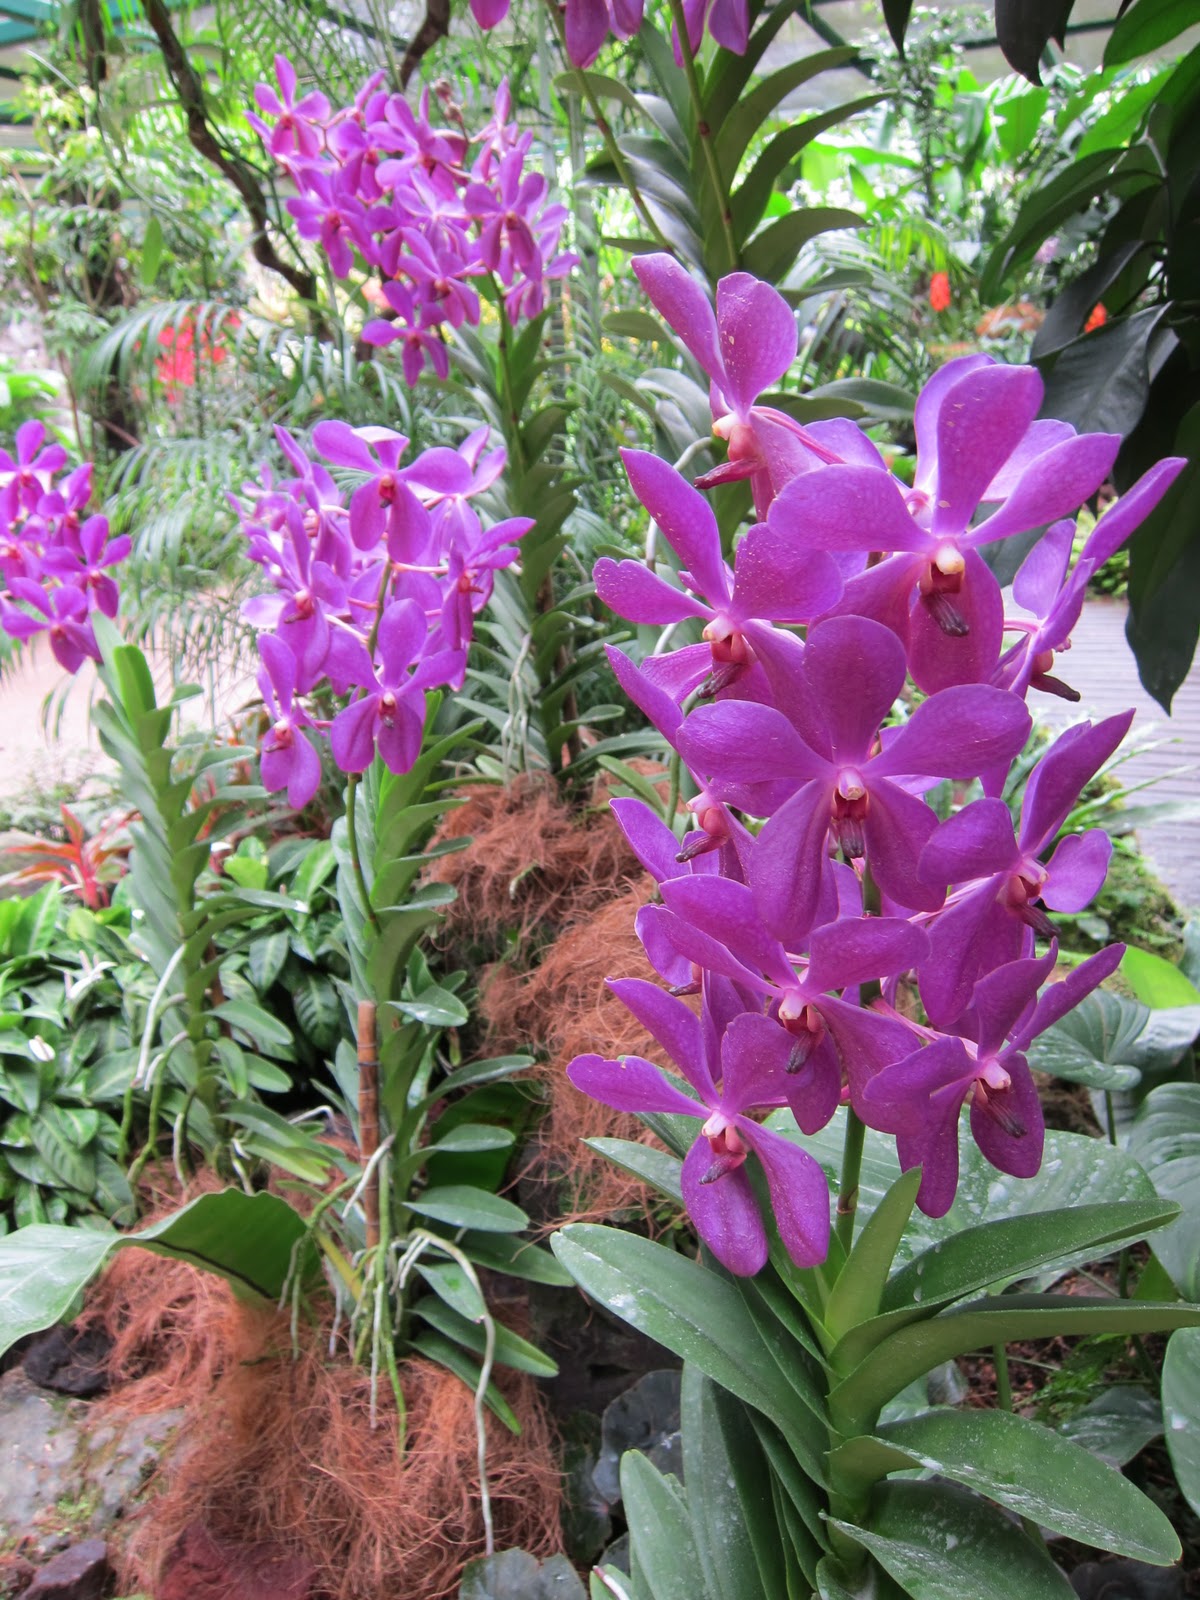 33 Best Photos Singapore Orchids And Cats : Singapore: Orchid Heaven - Don Enright